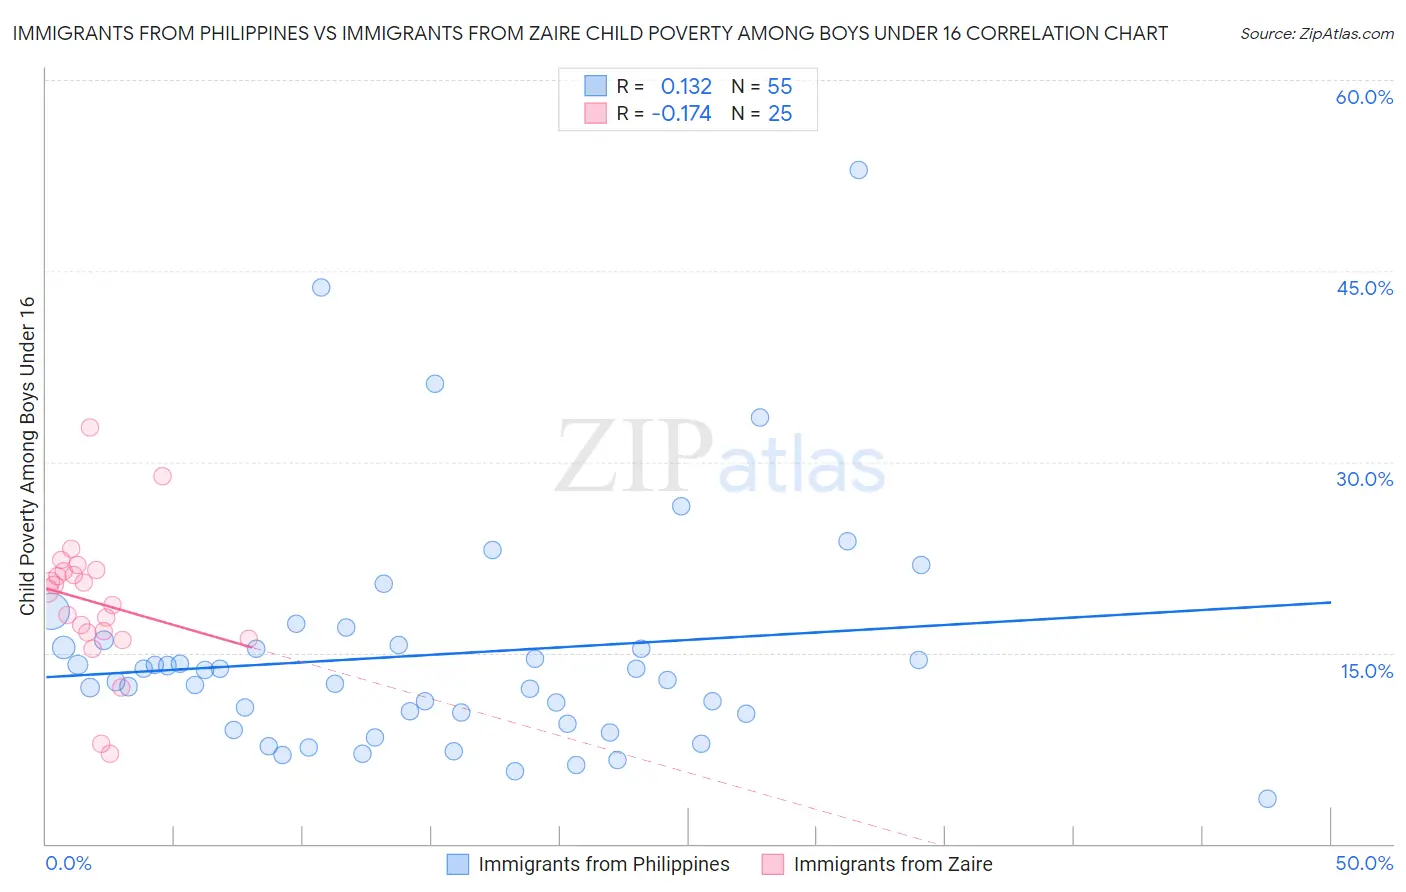 Immigrants from Philippines vs Immigrants from Zaire Child Poverty Among Boys Under 16